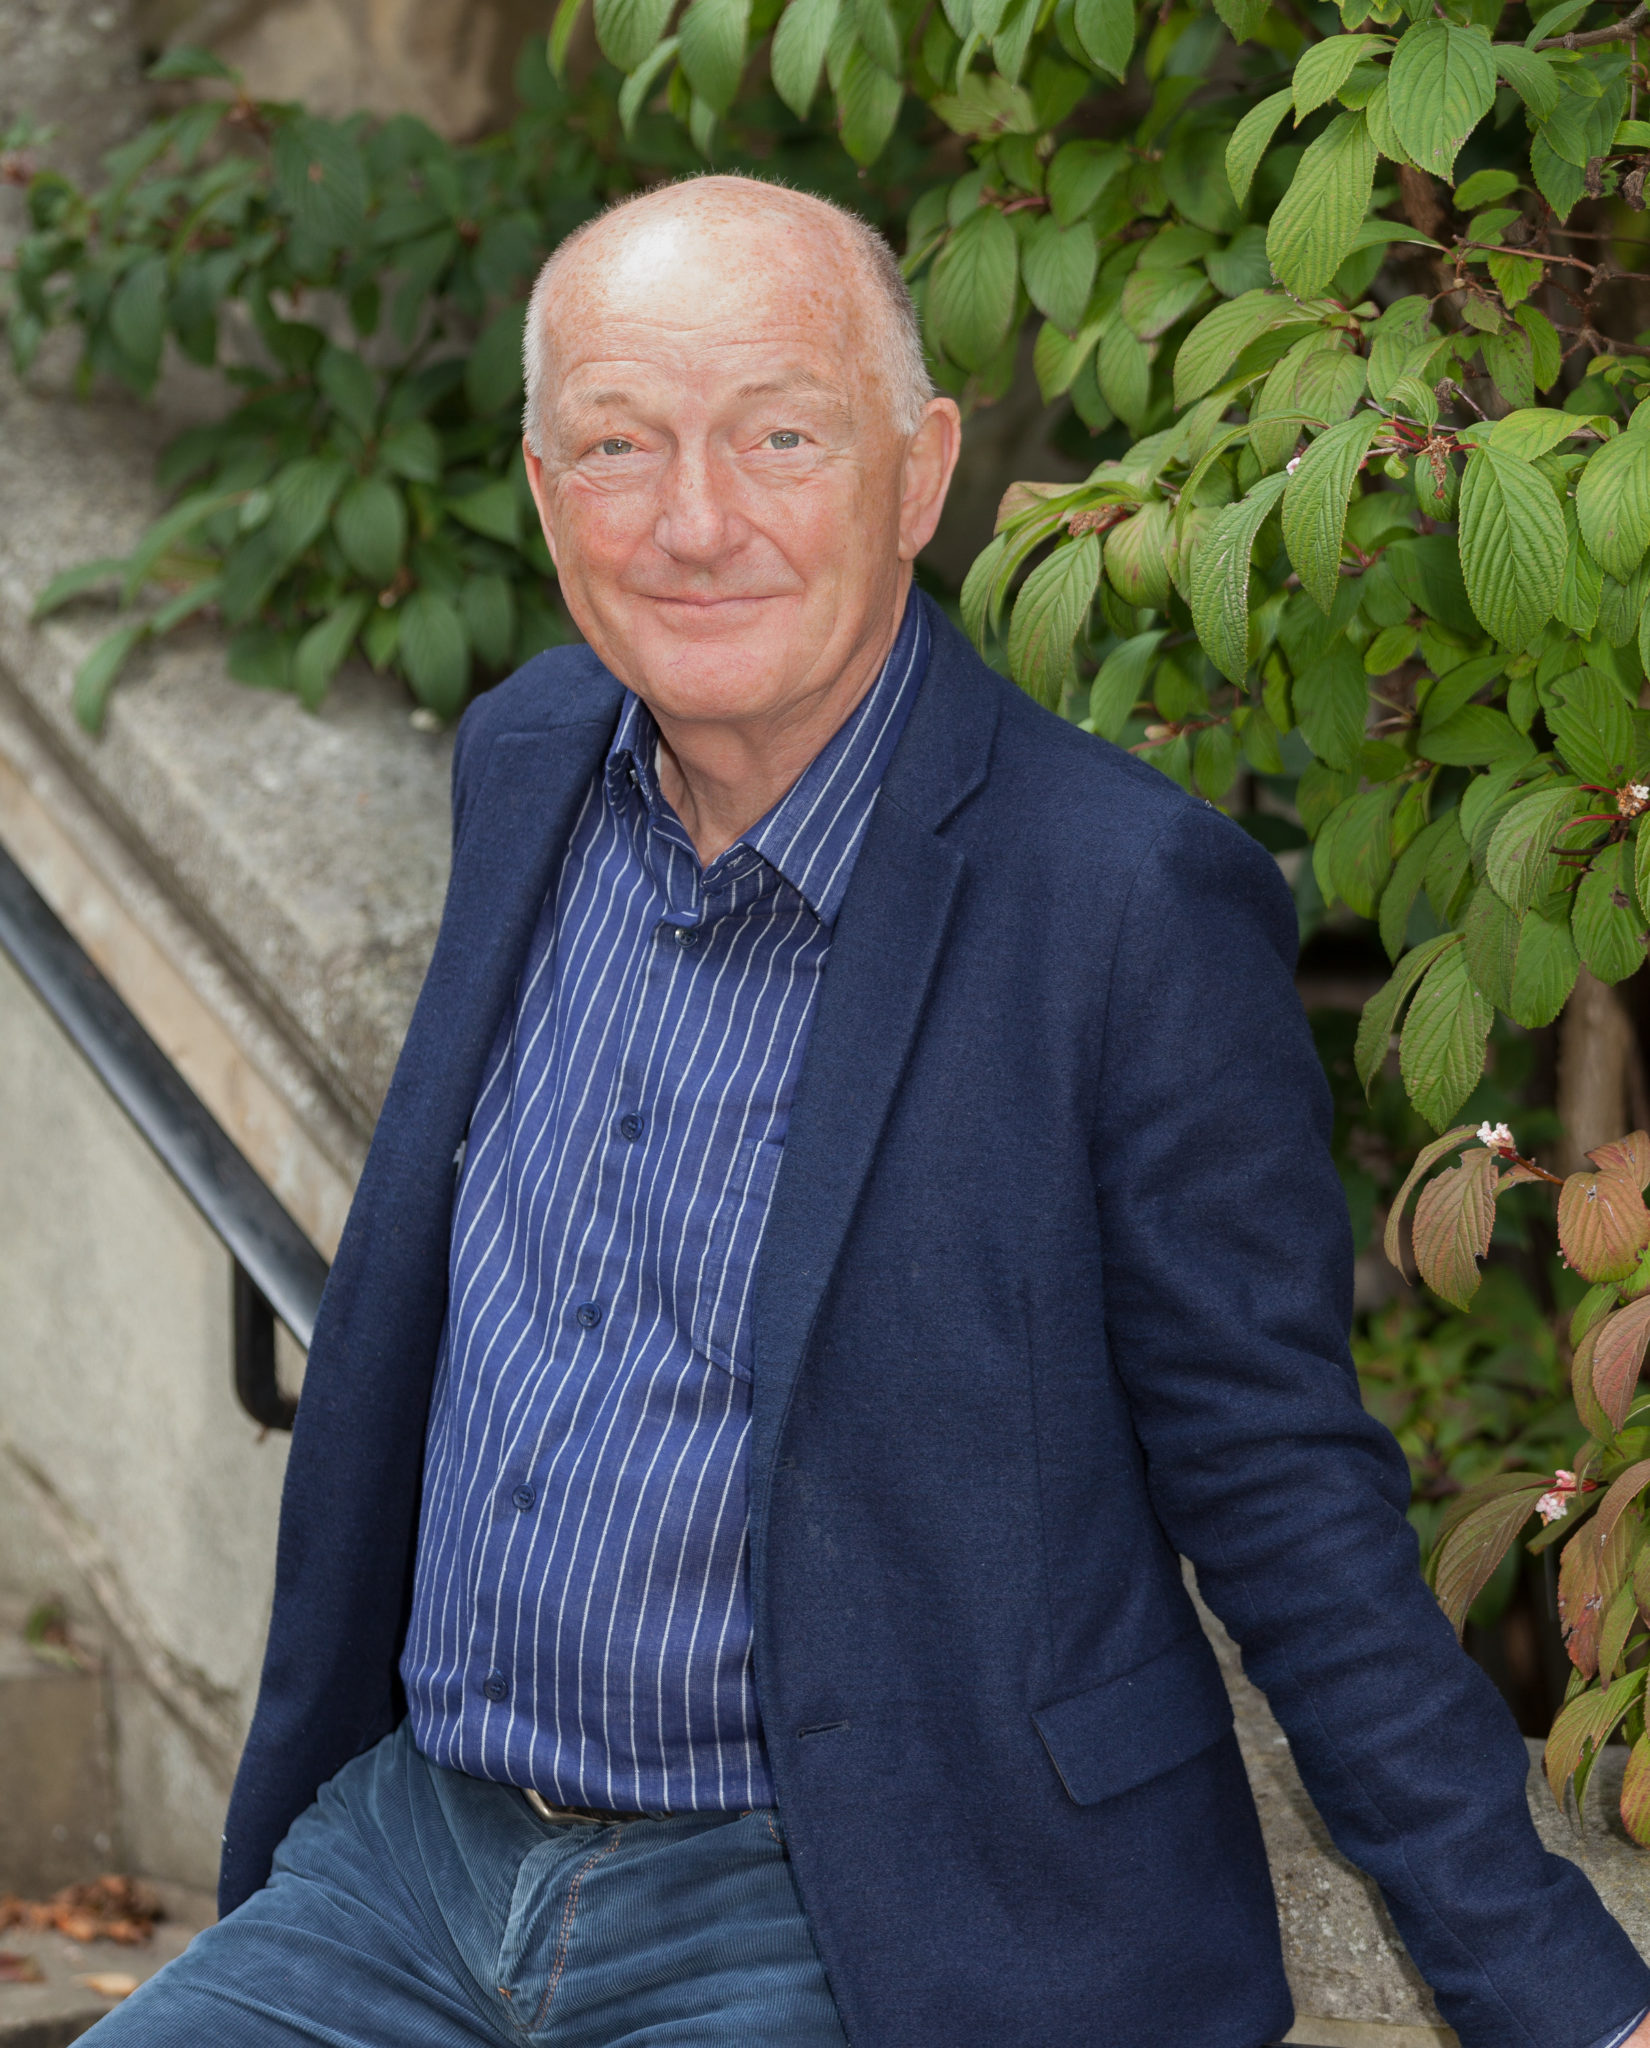 Wine writer Oz Clarke delivered a talk on the future of the alcoholic beverage industry at the inaugural Wine Pinnacle Awards